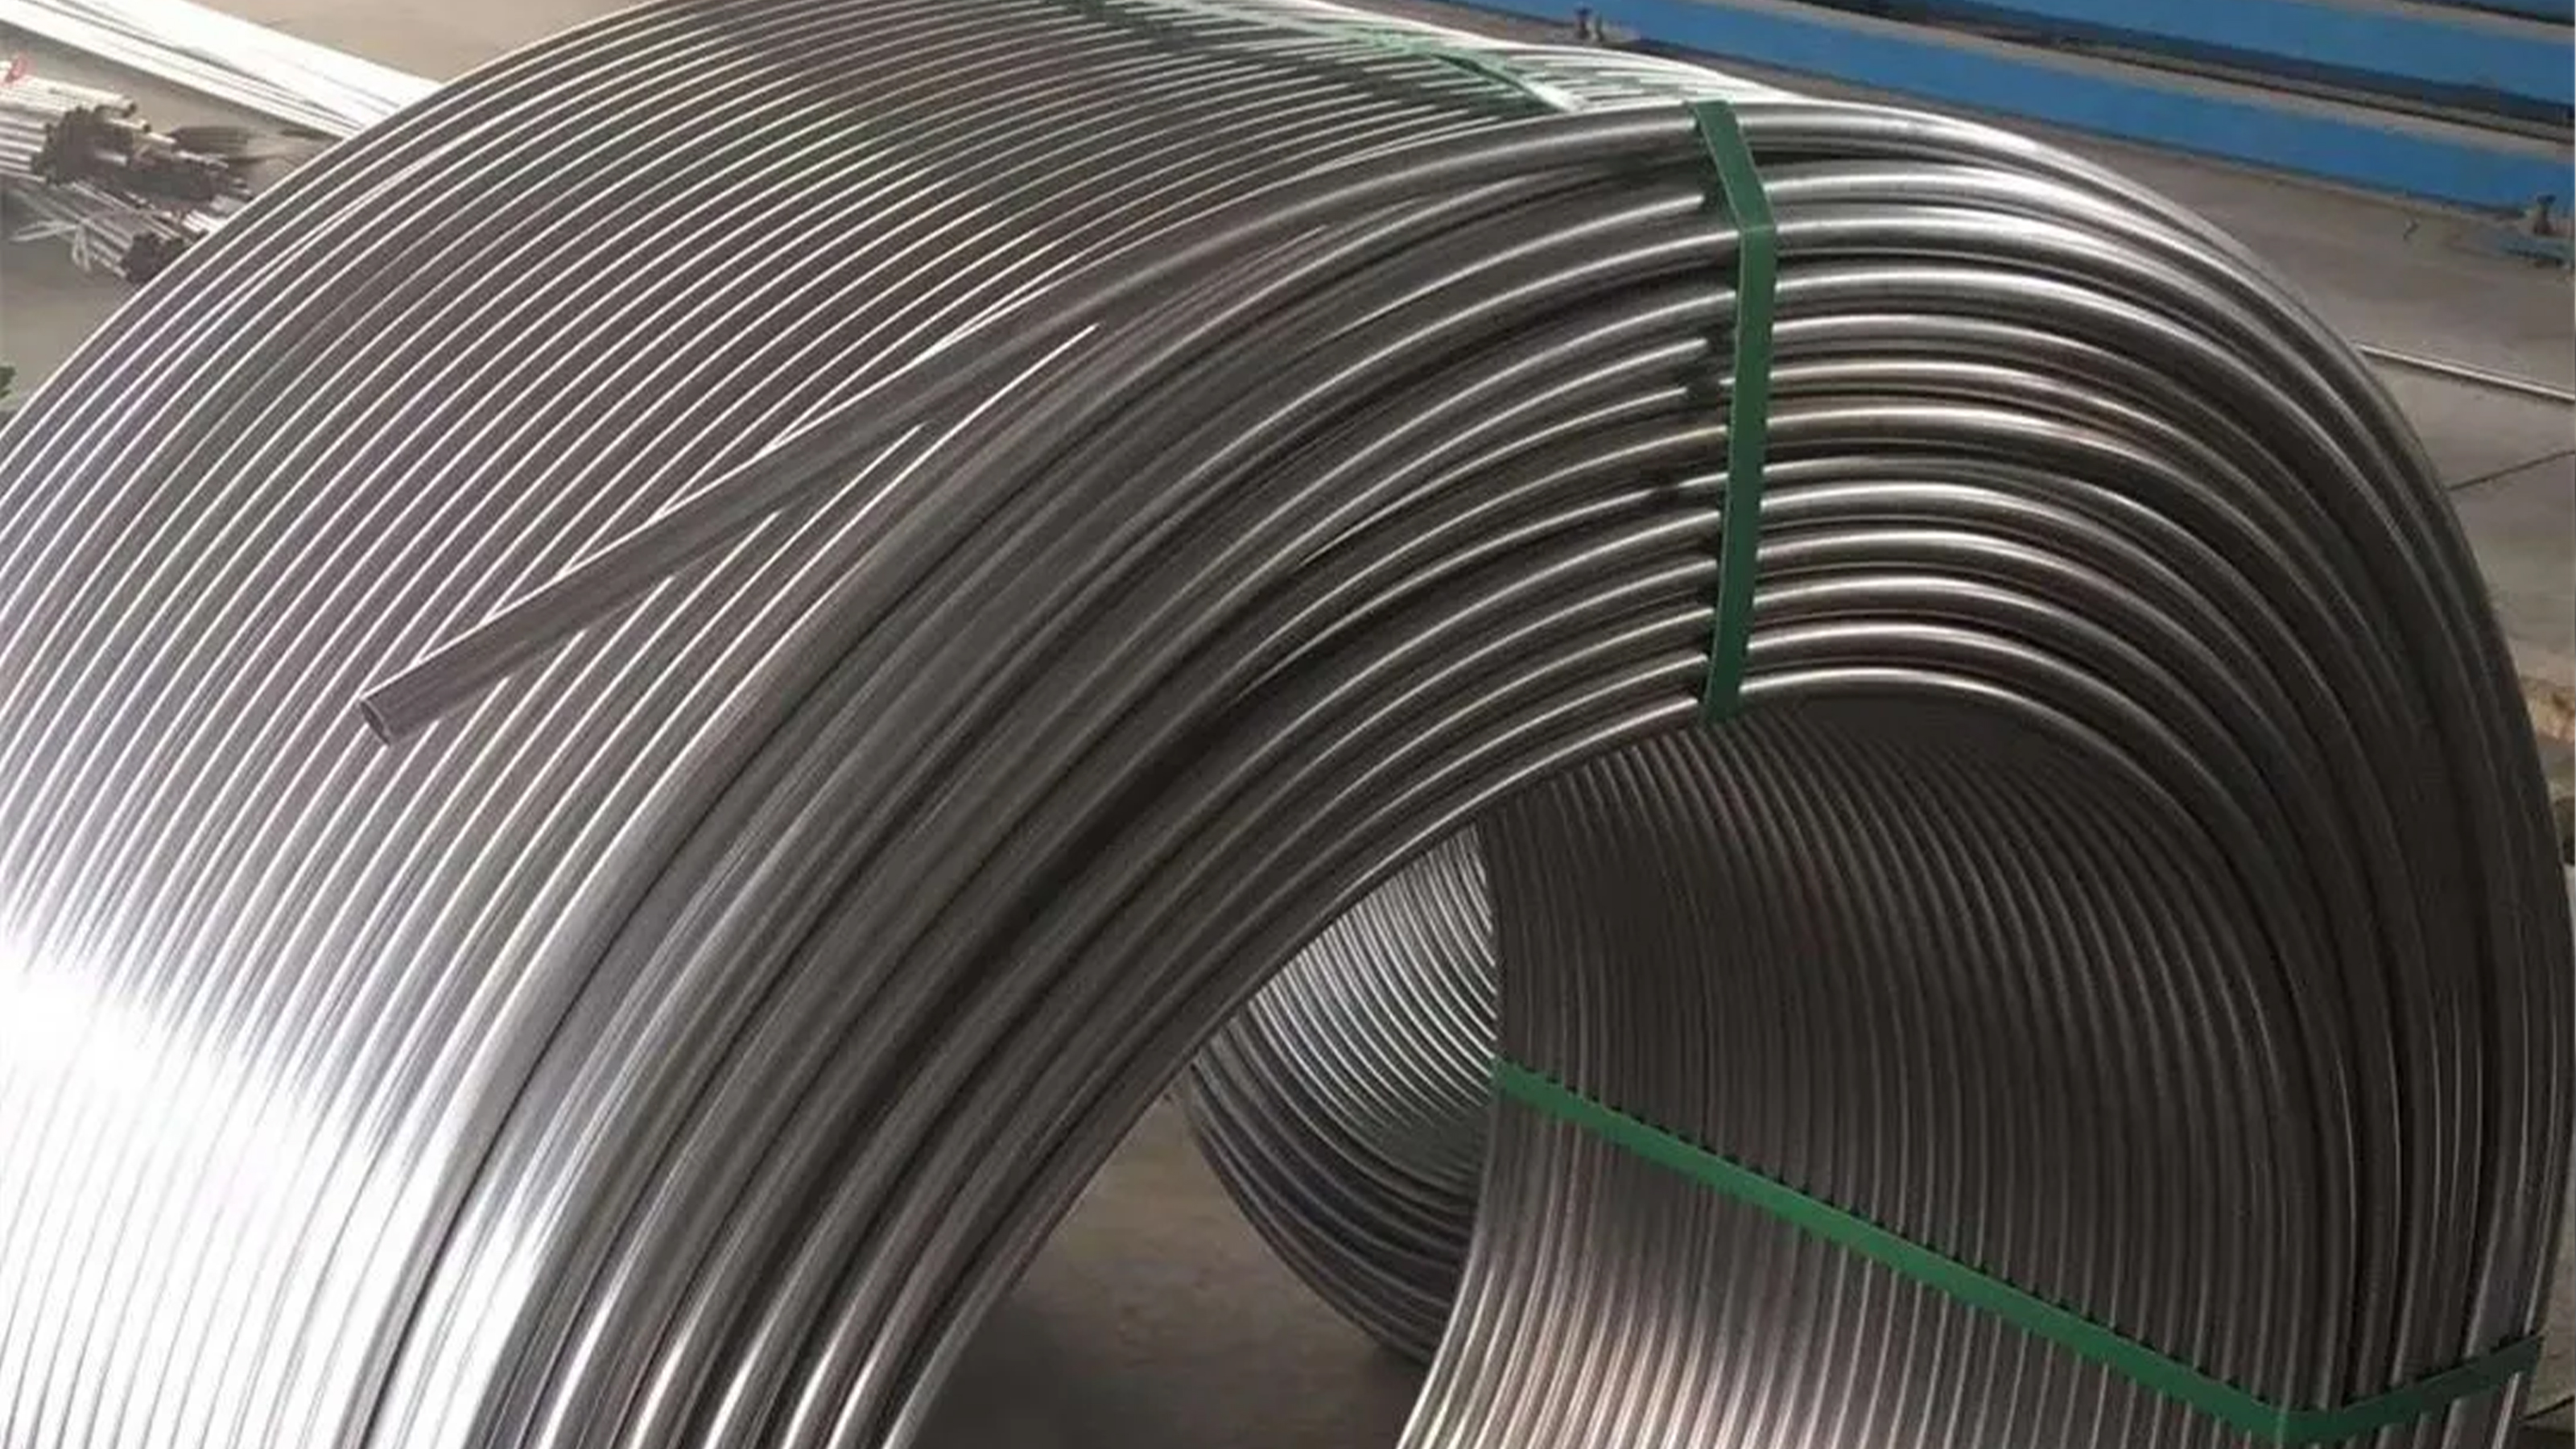 Stainless steel coil for condenser